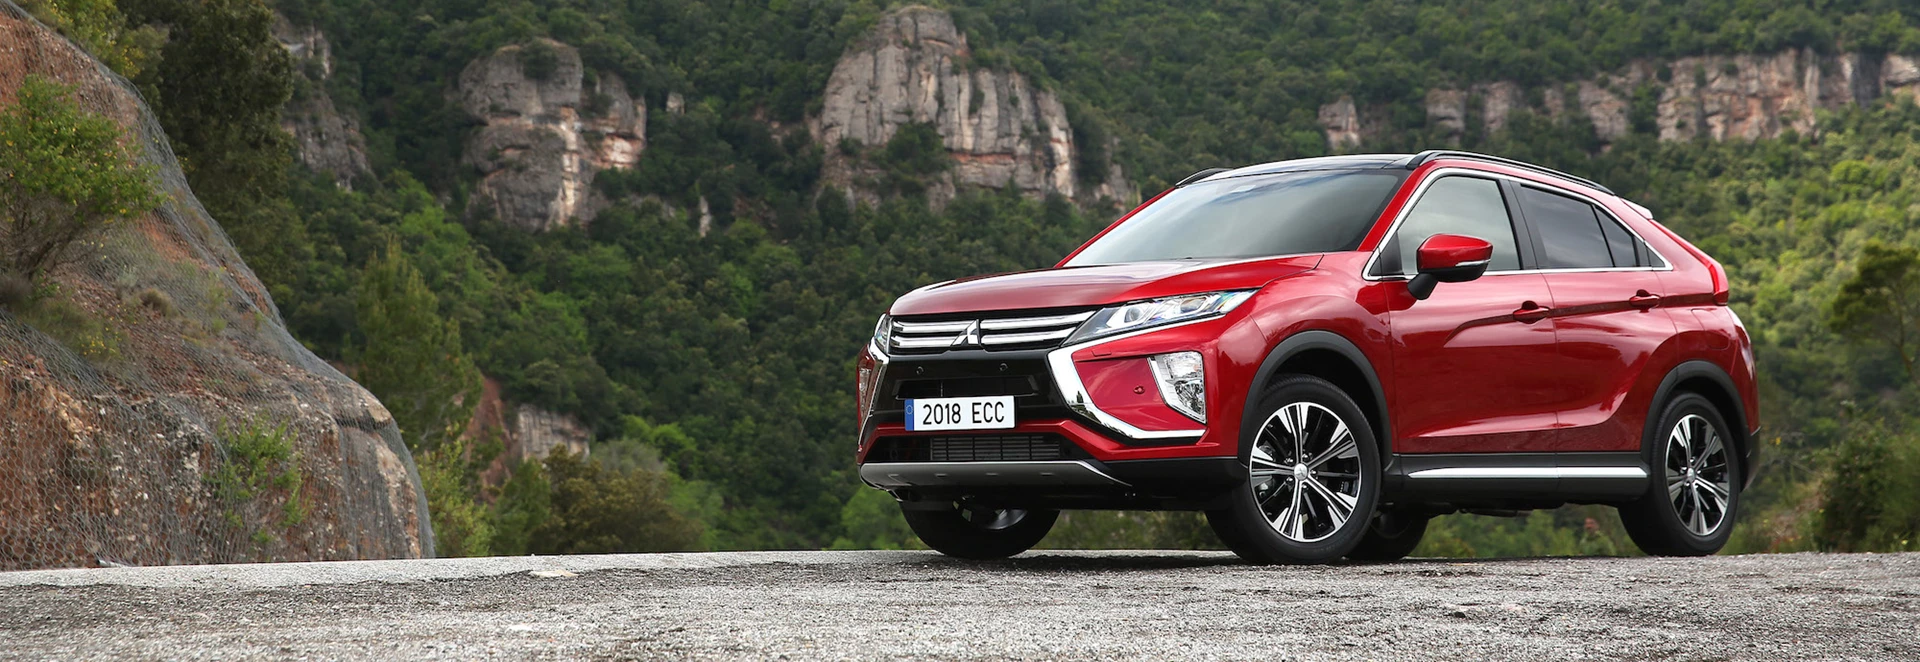 Five facts about the new 2018 Mitsubishi Eclipse Cross